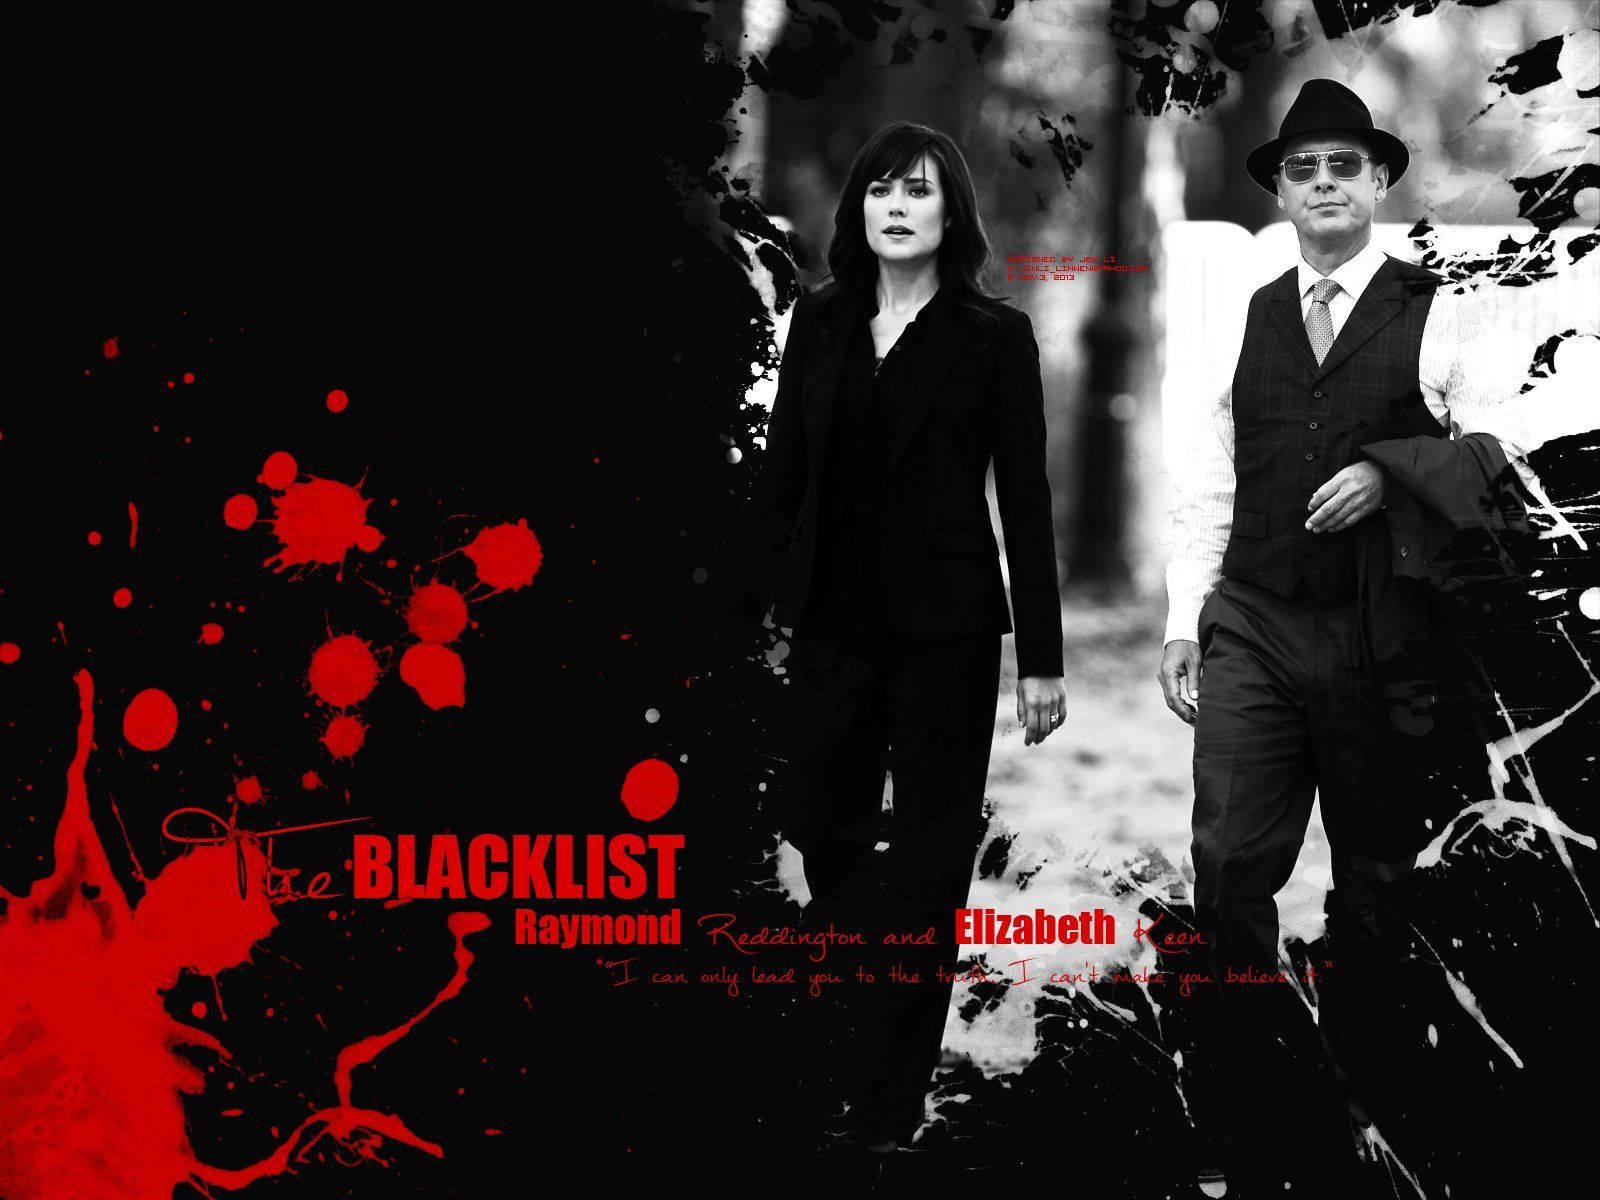 Red Is The Color Of The Blacklist